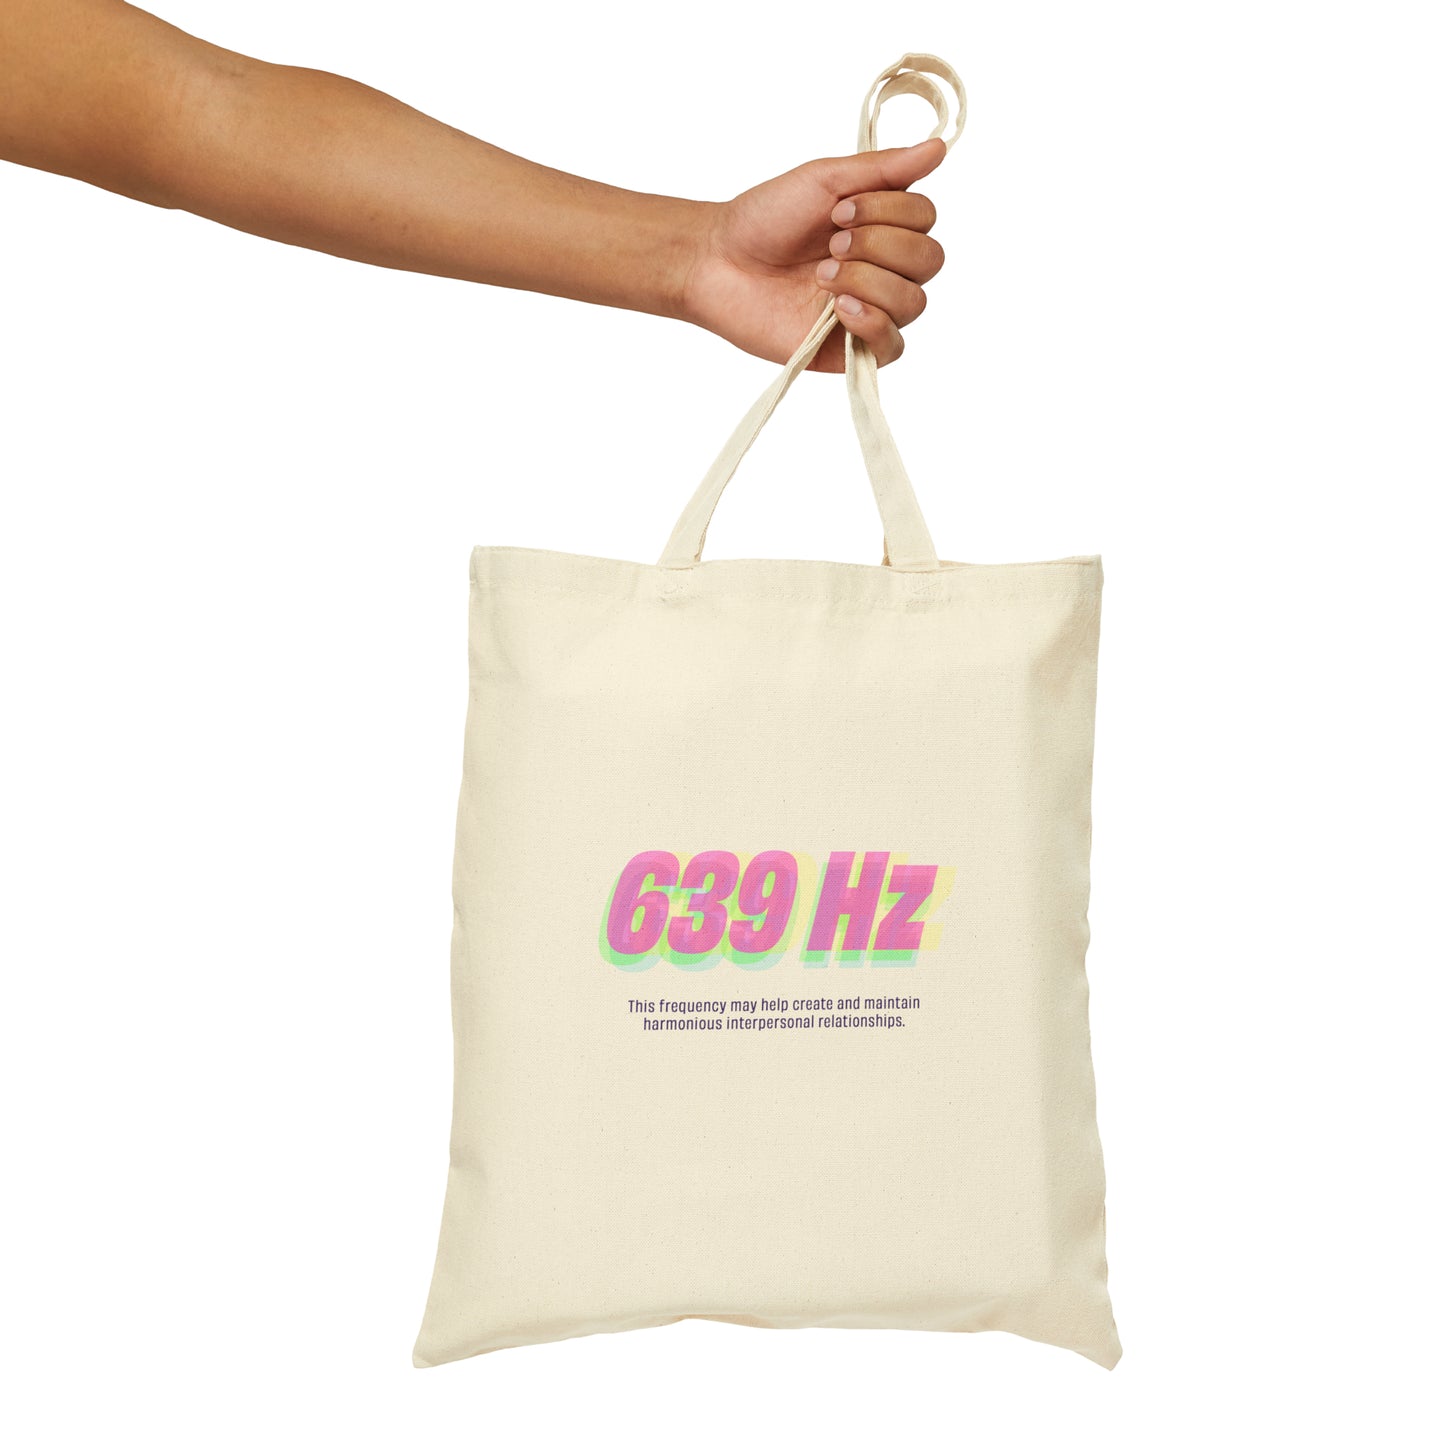 639 Hz Frequency Tote Bag